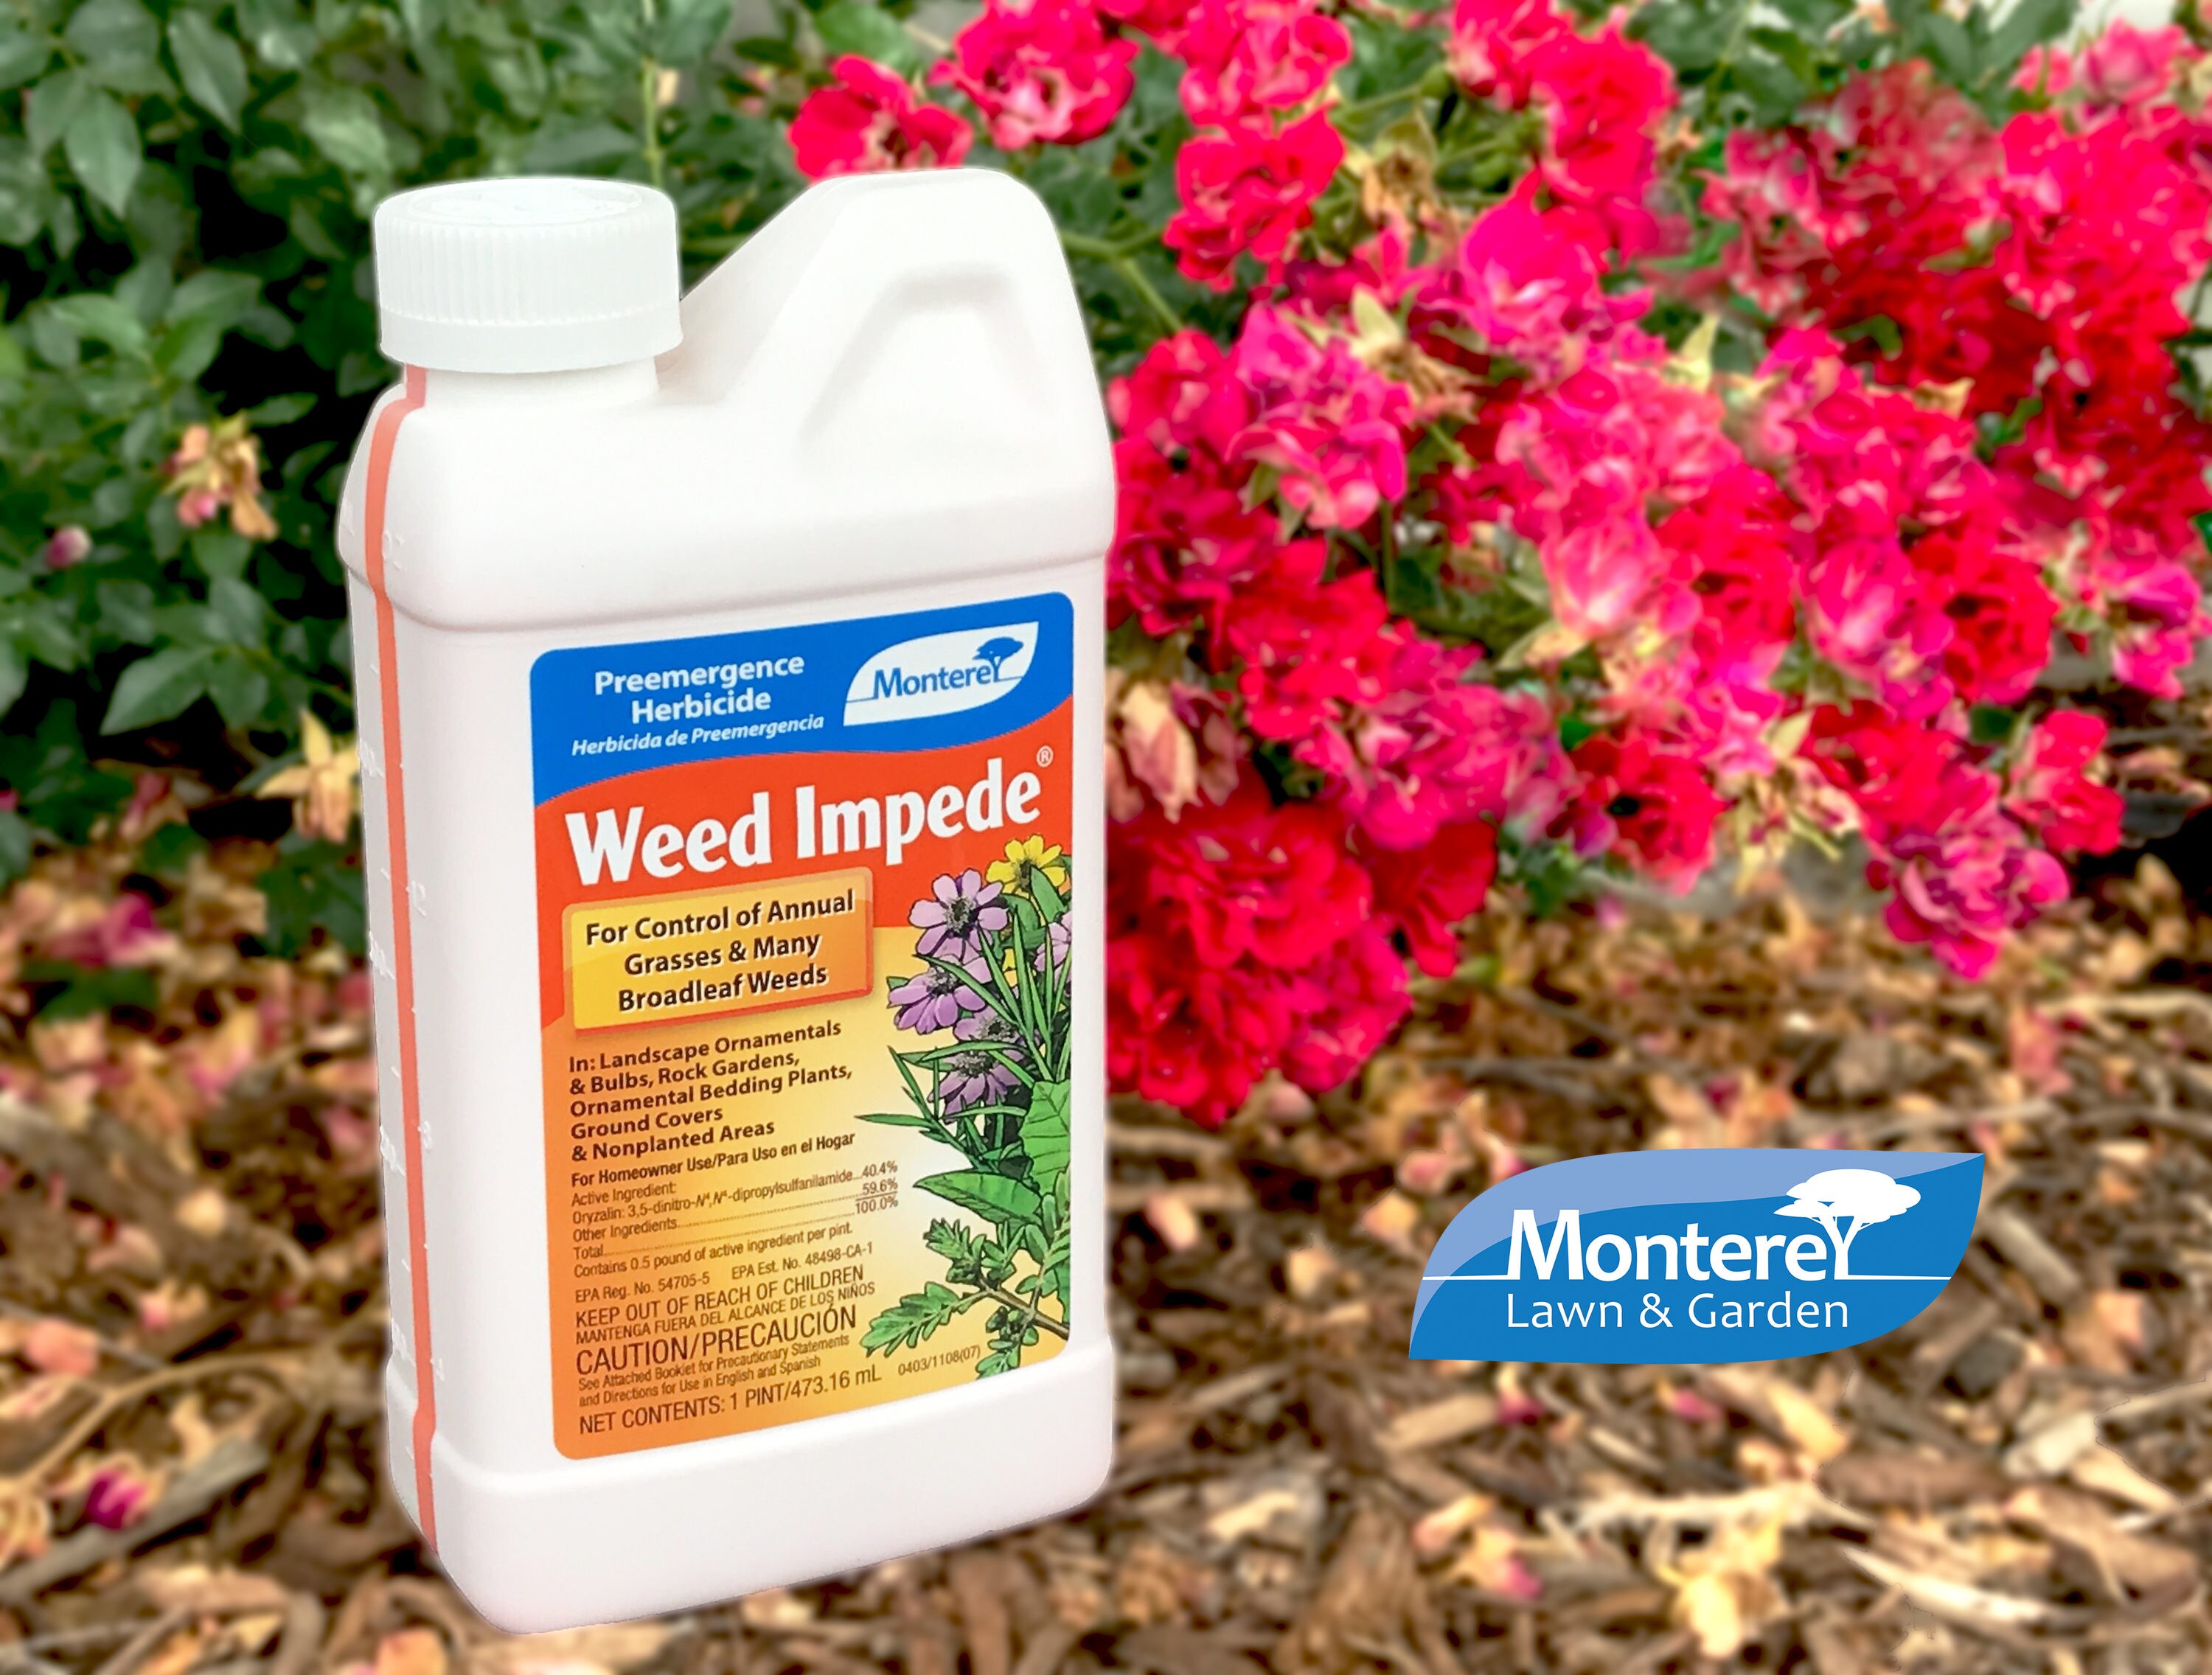 Monterey Weed impede 16-lb 10000-sq ft Concentrated Pre-emergent ...